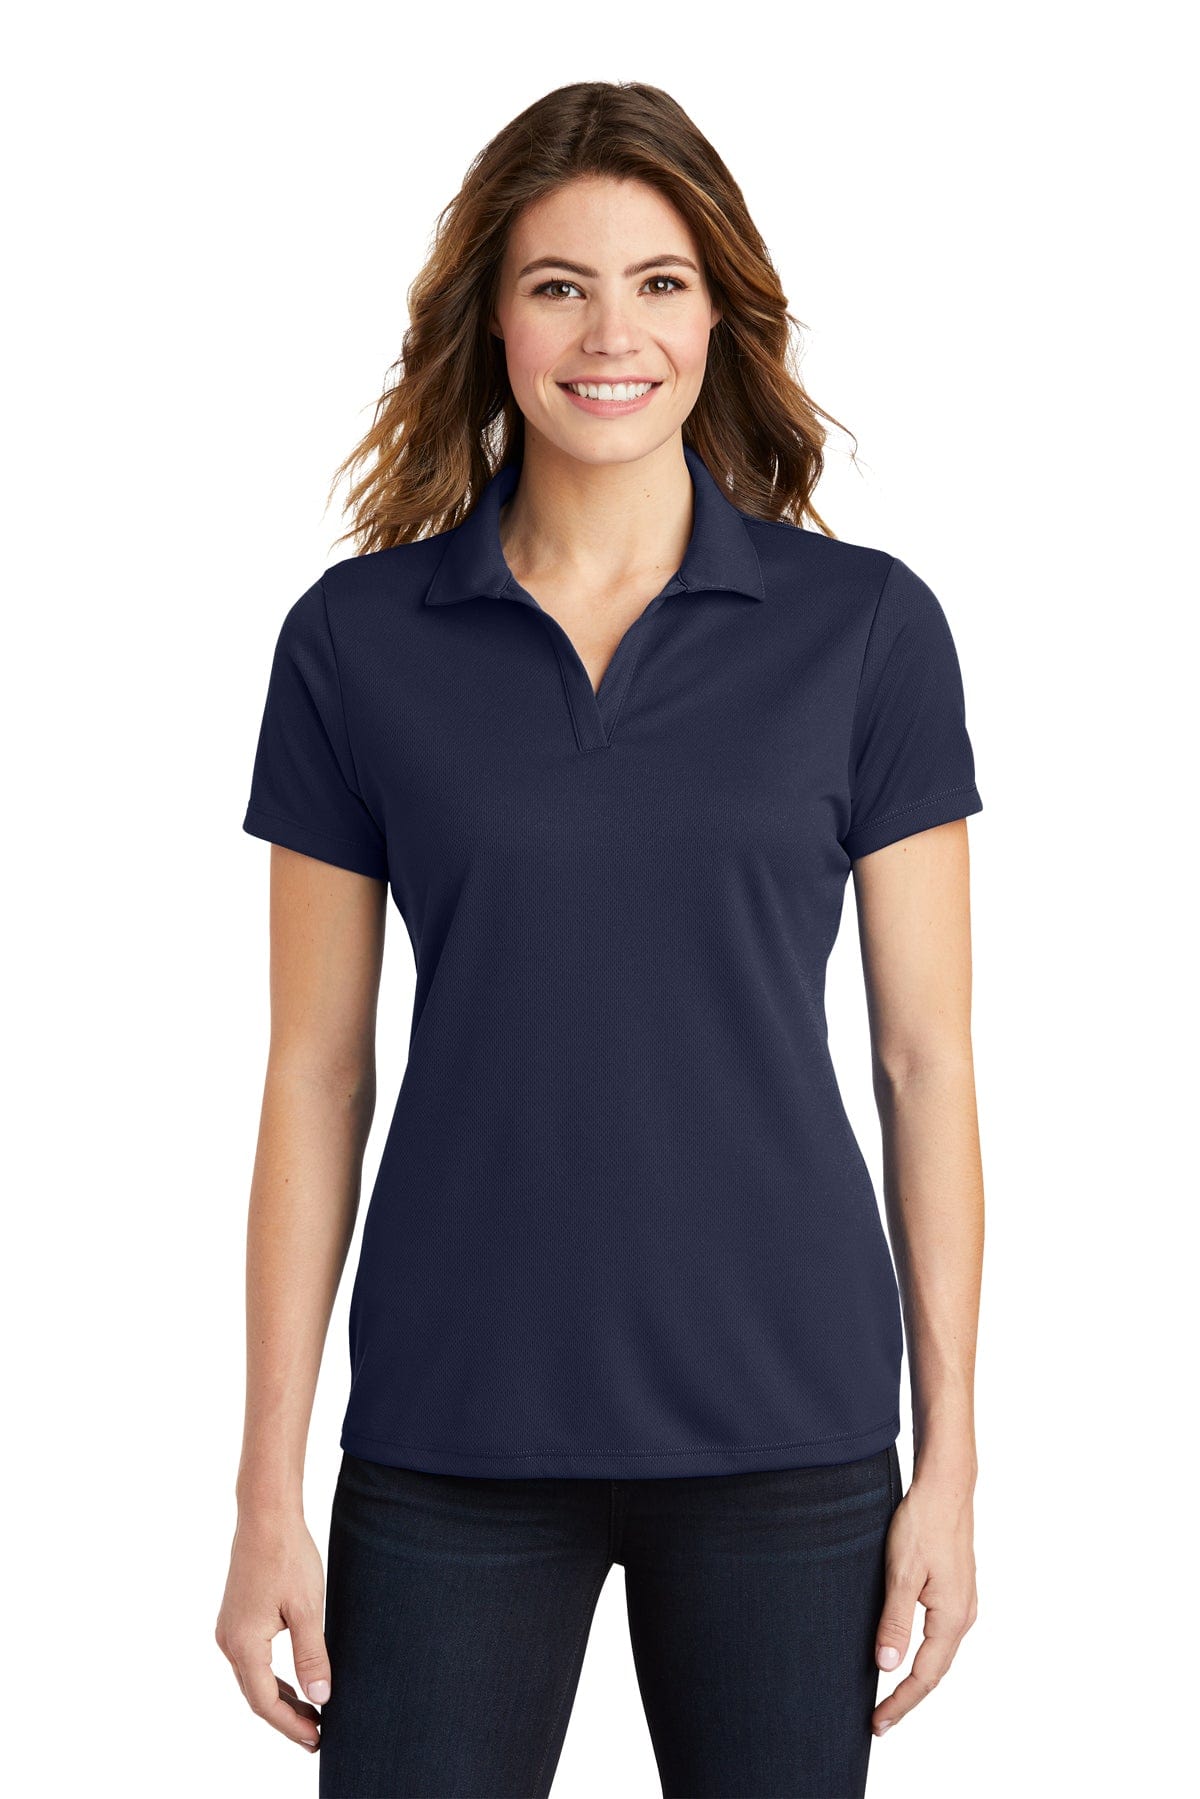 Equestrian Team Apparel Navy / XS Maplewood Warmbloods- Men's Polos equestrian team apparel online tack store mobile tack store custom farm apparel custom show stable clothing equestrian lifestyle horse show clothing riding clothes horses equestrian tack store